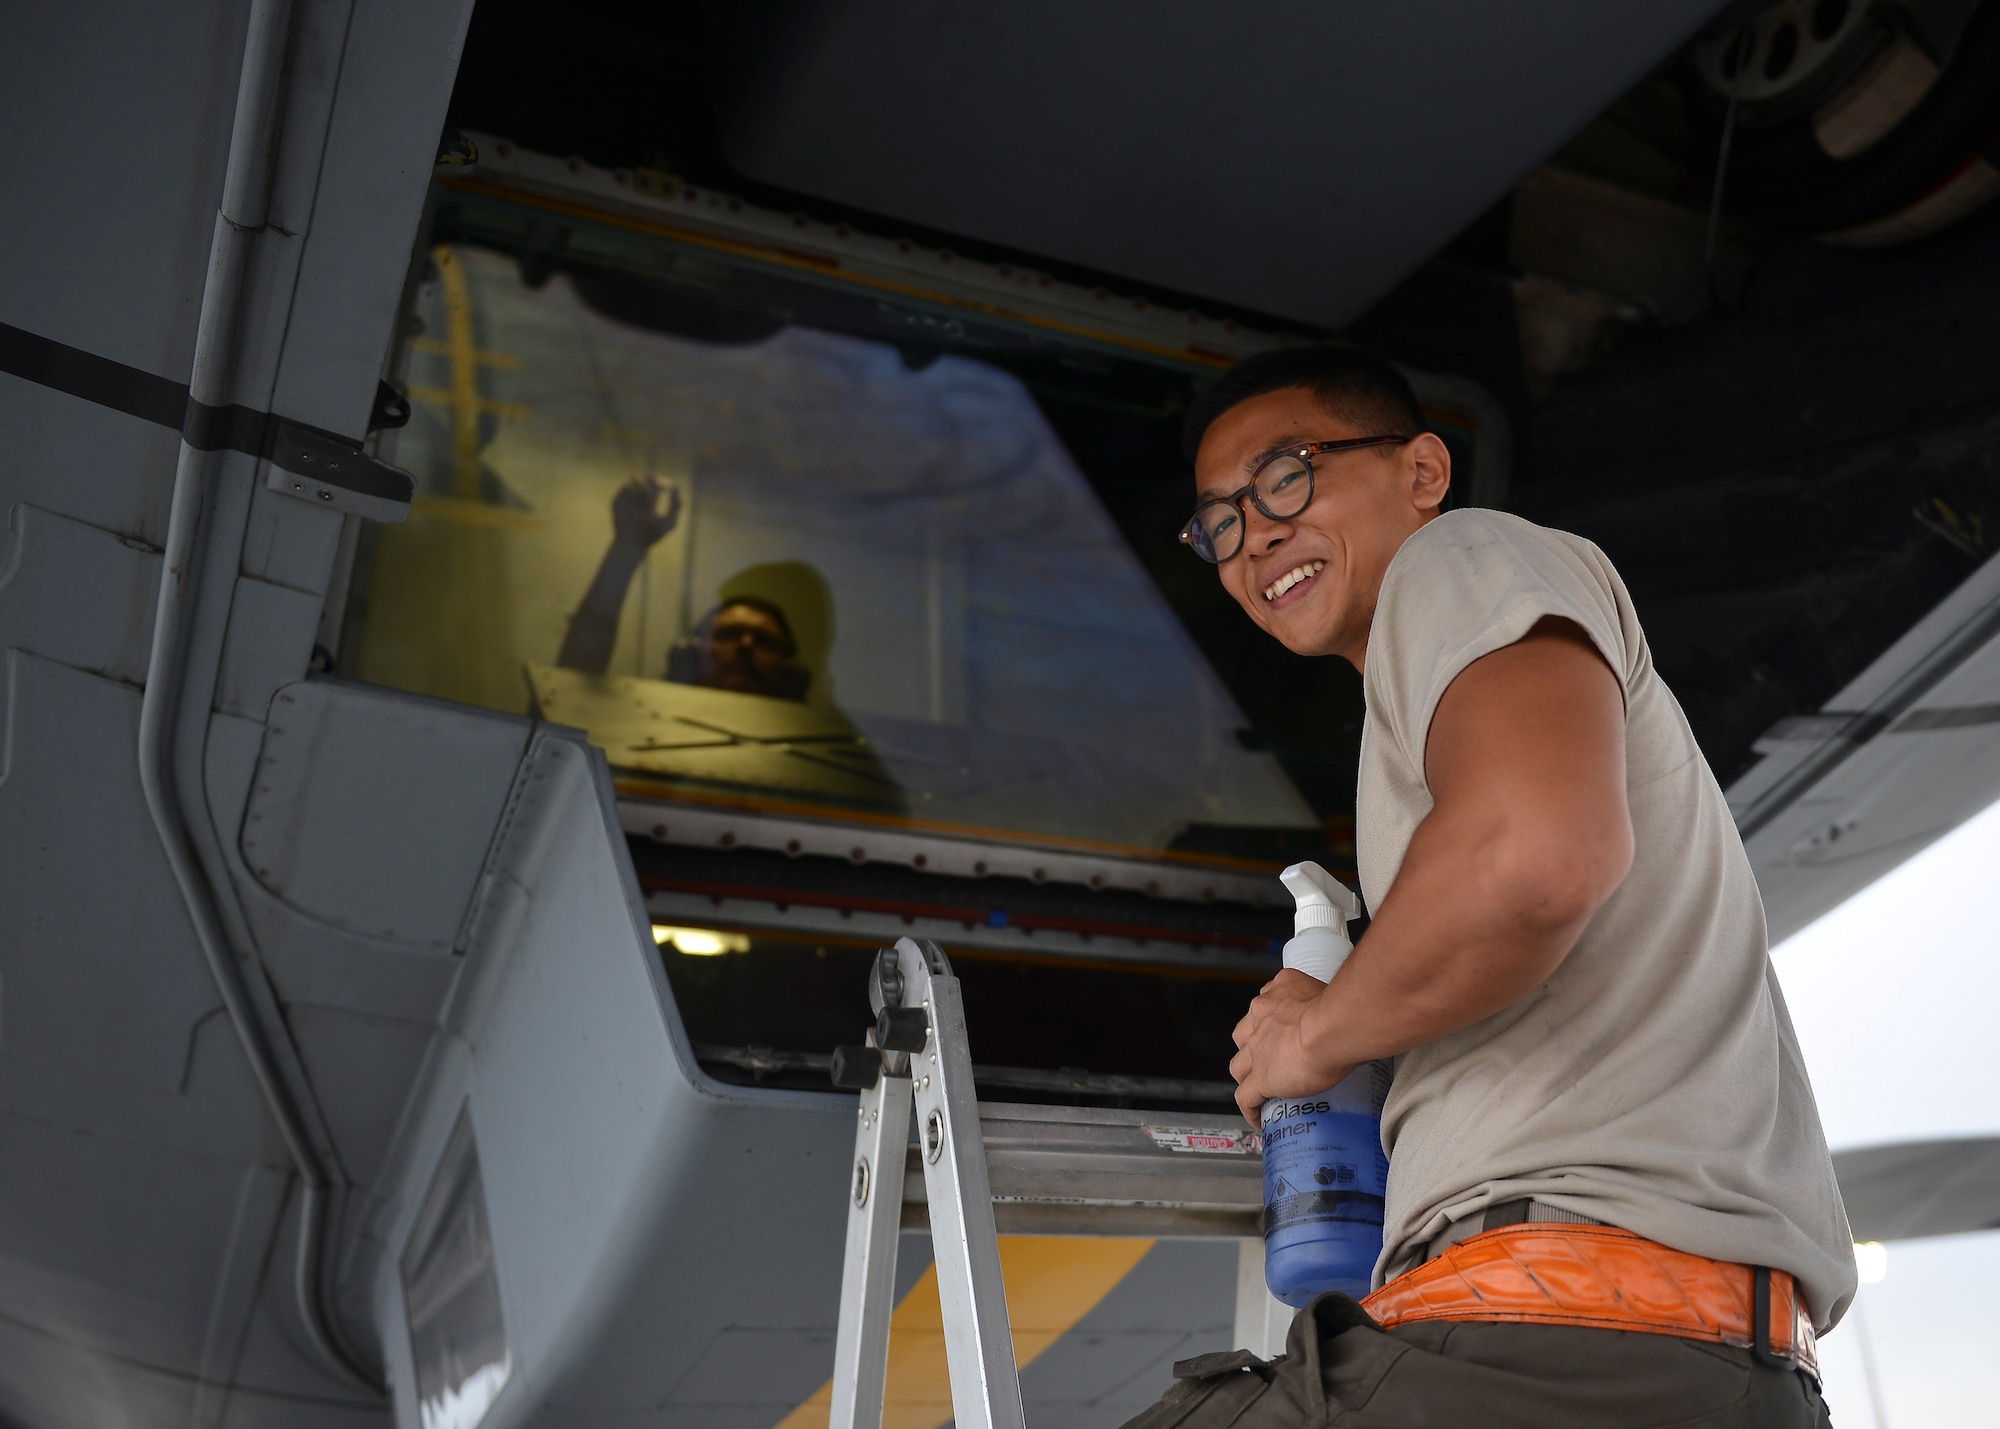 U.S. Air Force Senior Airman Franklin Kaunang, KC-10 crew chief, cleans the window of a KC-10 Extender assigned to the 380th Air Expeditionary Wing, Al Dhafra Air Base, United Arab Emirates, March 2, 2018. The 380th generates multiple aircraft types providing combat missions in joint and combined aerospace operations with Army, Navy, Marine Corps & Coalition forces. (U.S. Air Force photo by Tech. Sgt. Anthony Nelson Jr.)